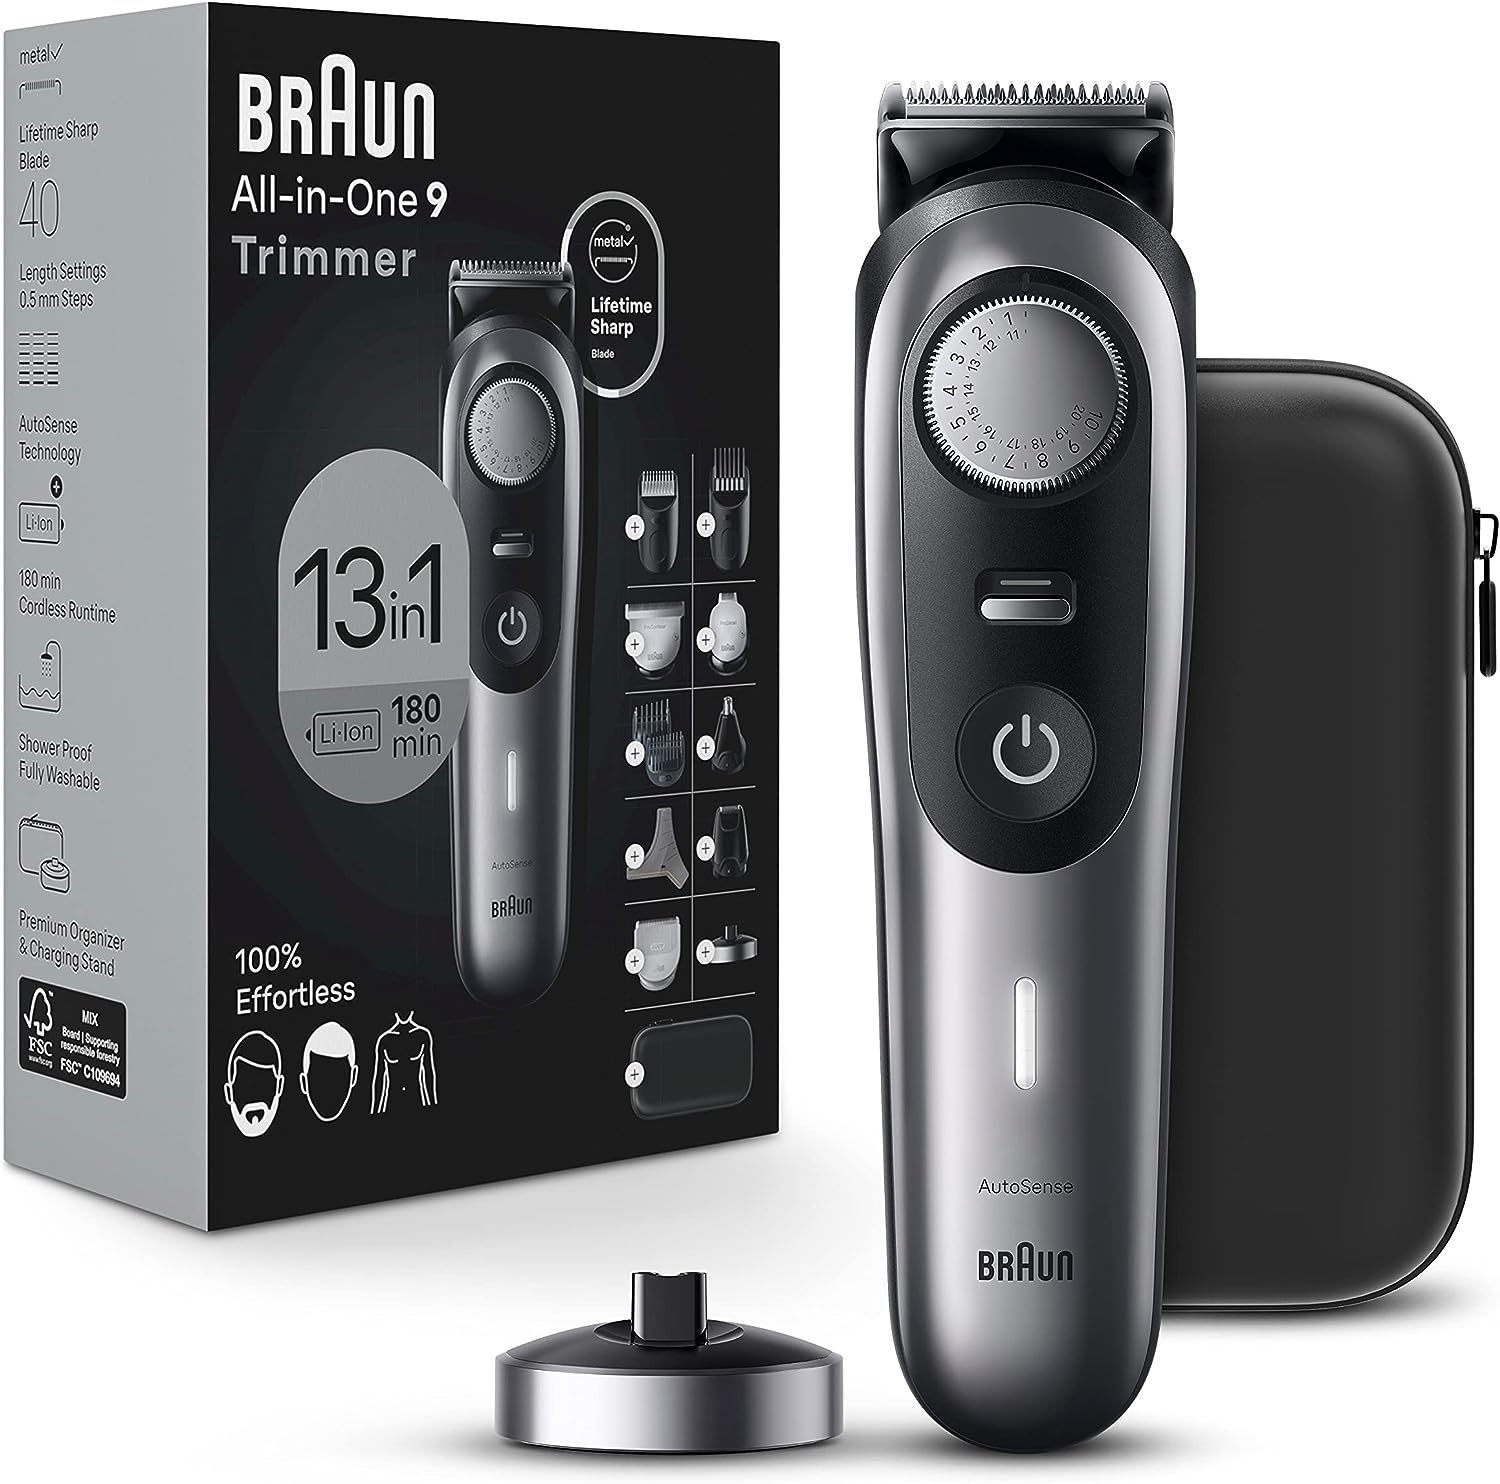 Braun All-in-One Style Kit Series 9 9440, 13-in-1 Trimmer for Men with Beard Trimmer